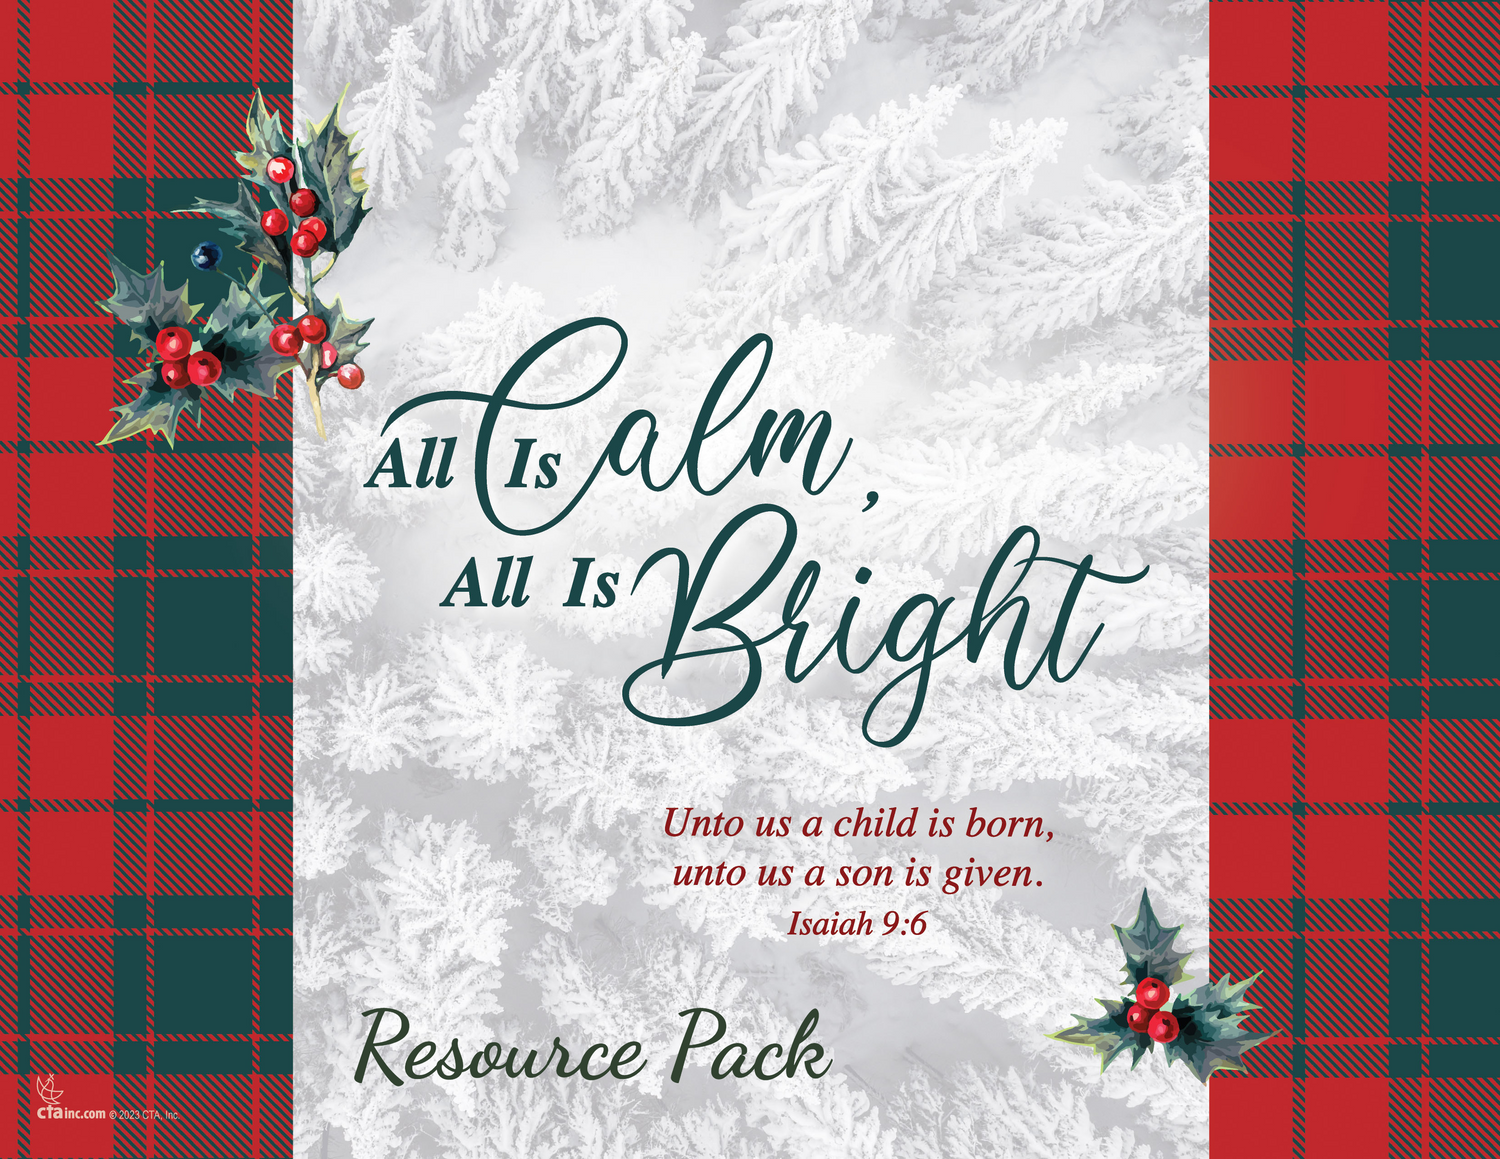 Free downloadable resource pack from the All Is Calm All Is Bright gifts from CTA, Inc